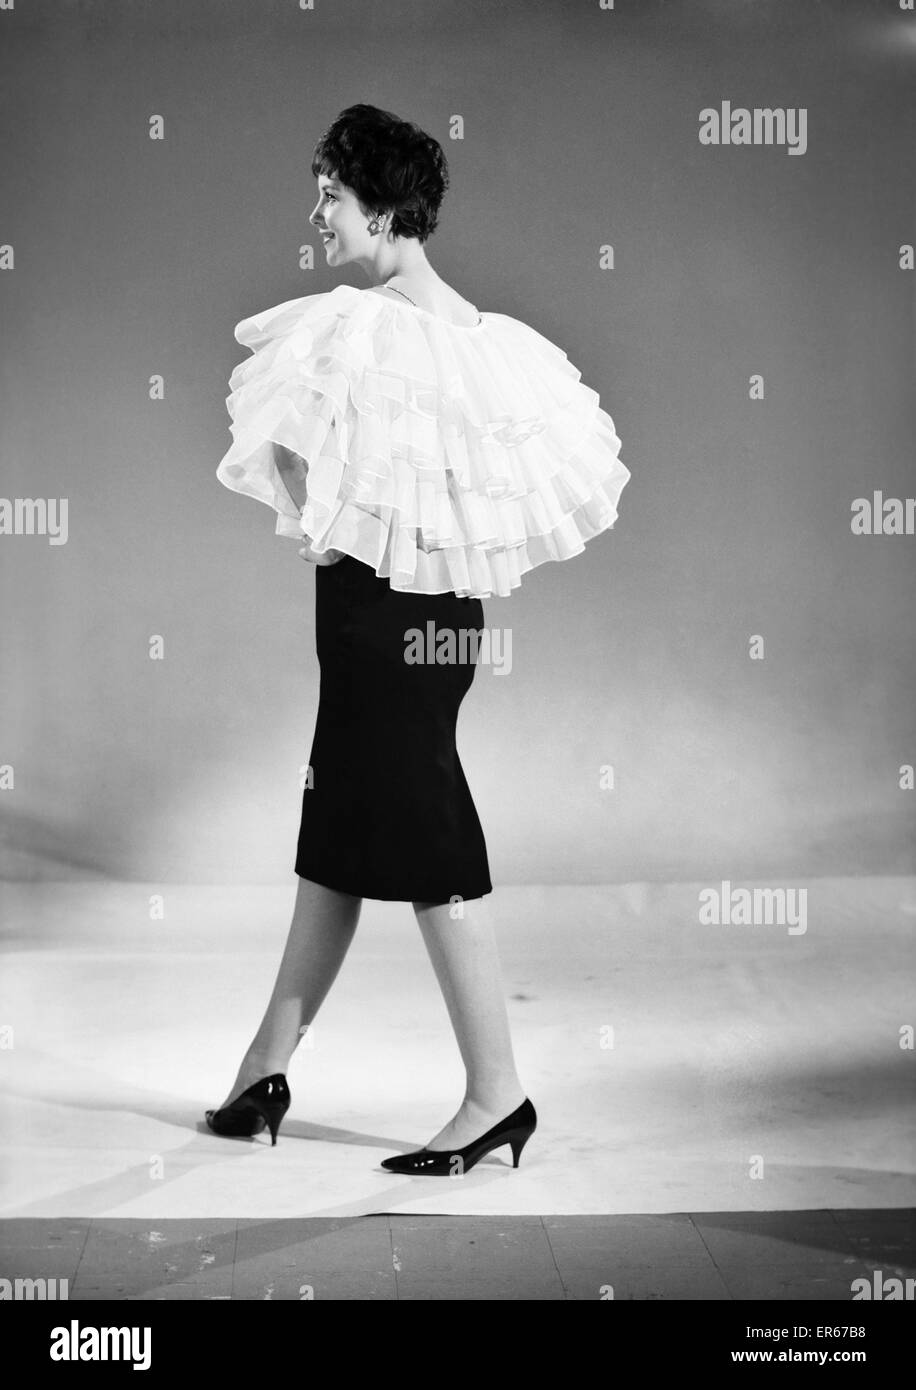 Frilly Skirt High Resolution Stock Photography and Images - Alamy